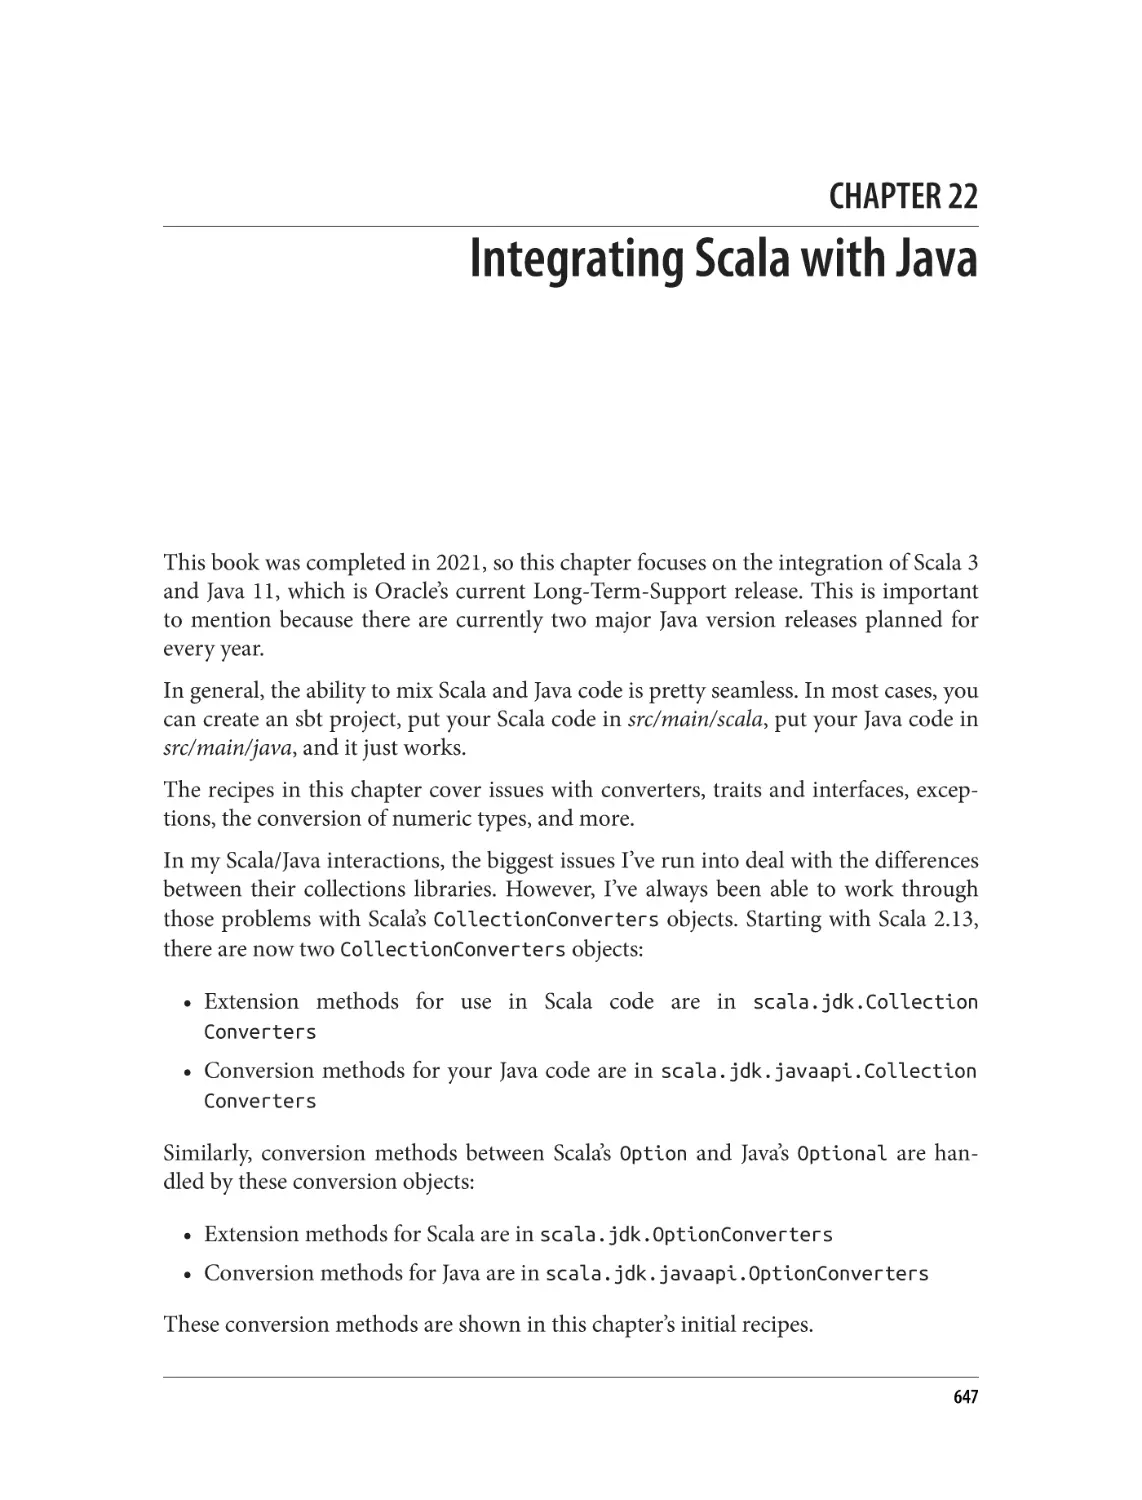 Chapter 22. Integrating Scala with Java